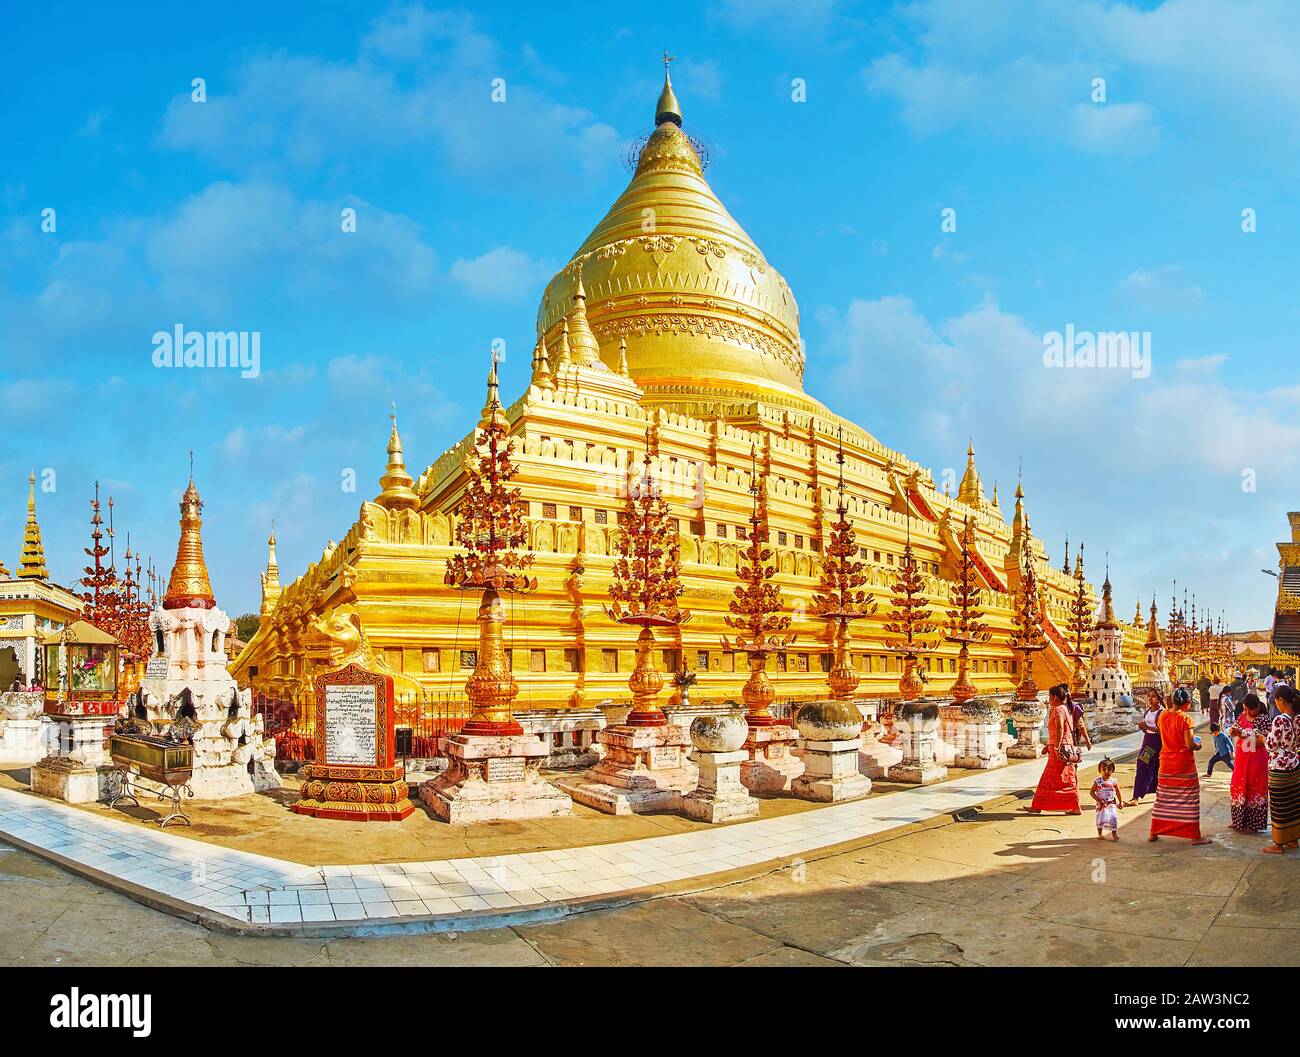 BAGAN, MYANMAR - FEBRUARY 25, 2018: The main stupa of Shwezigon Pagoda, decorated with carved spires with golden flowers and bells, on February 25 in Stock Photo